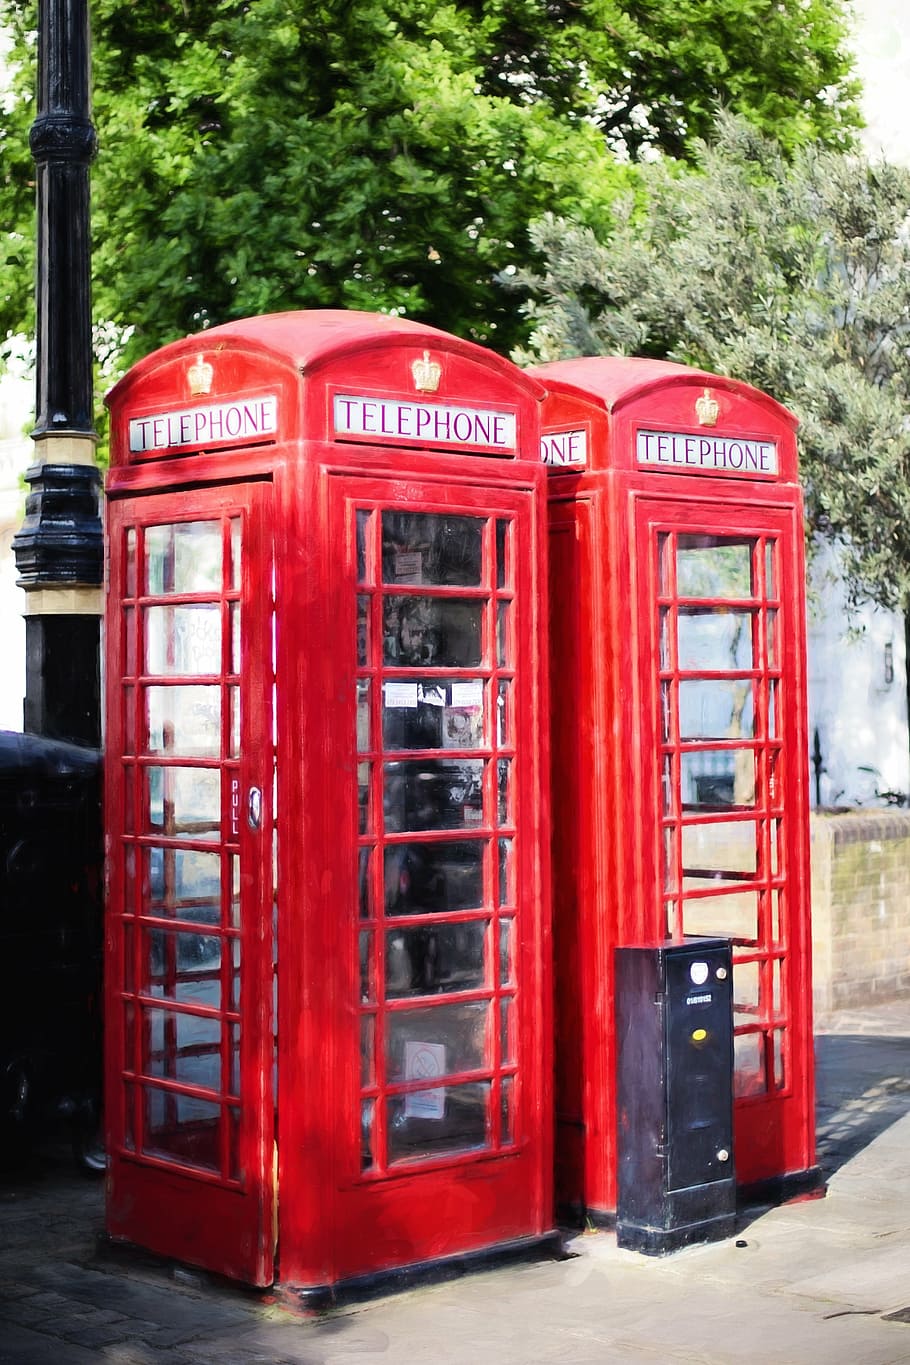 HD wallpaper: two red telephone booths, england, british, london, city ...